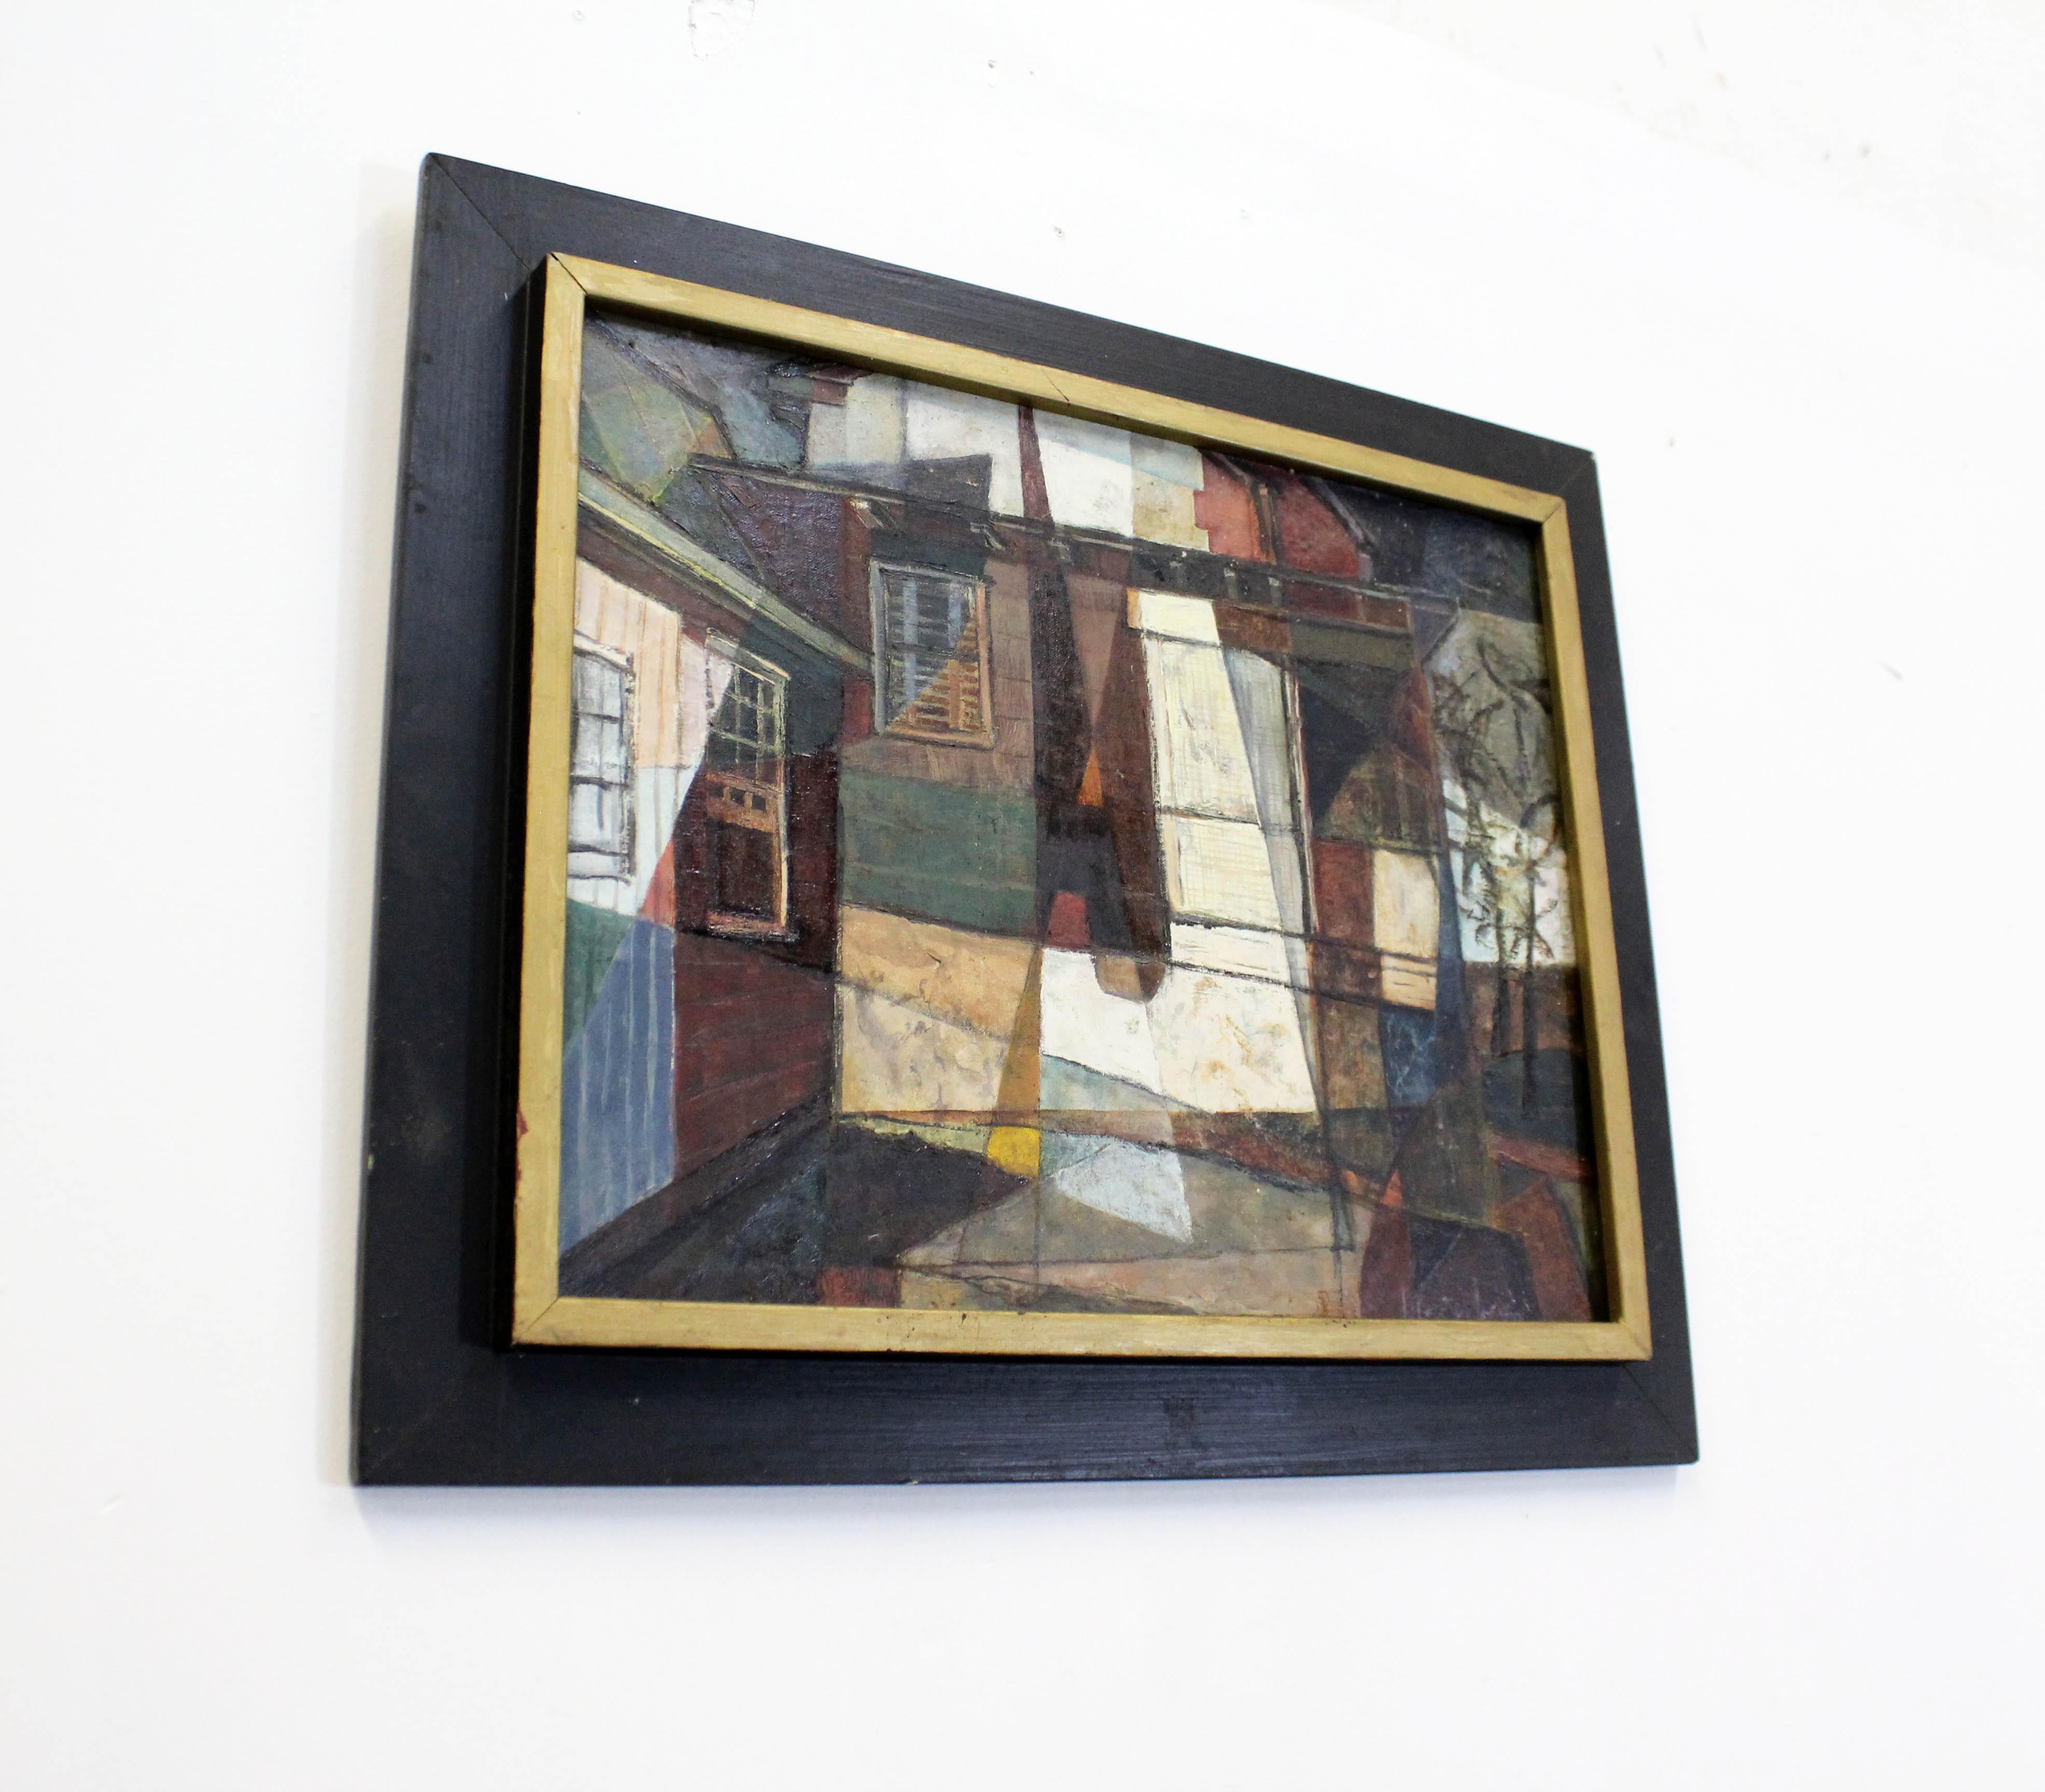 Offered is a vintage abstract oil painting on canvas, entitled 'Country House' by Frieda Weinberg. Features colorful layered oil depicting what looks to be elements of a house through Modern perception. It is in very good condition with slight age